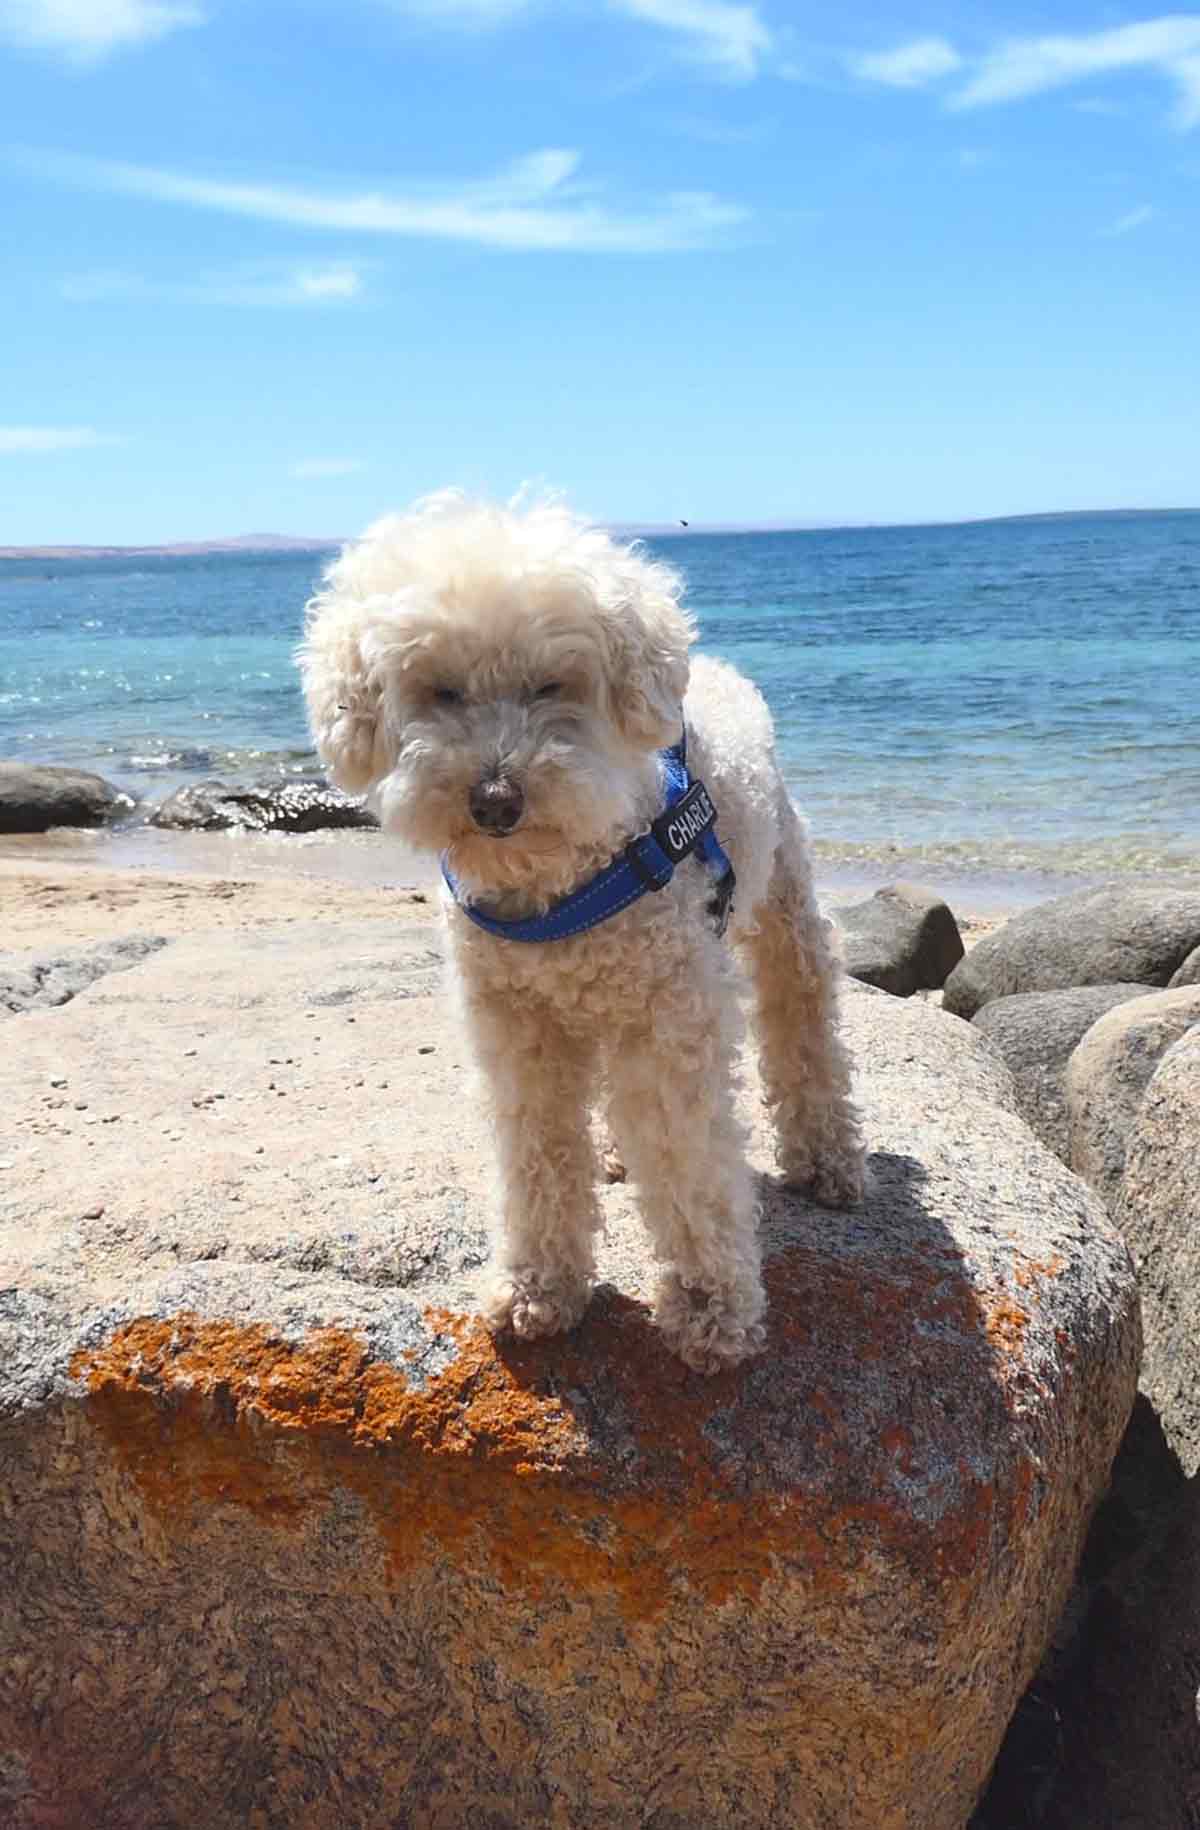 Charlie standing on a rock at Shelly Beach along Parnkalla Trail (second section). Located in Port Lincoln, Eyre Peninsula, South Australia.